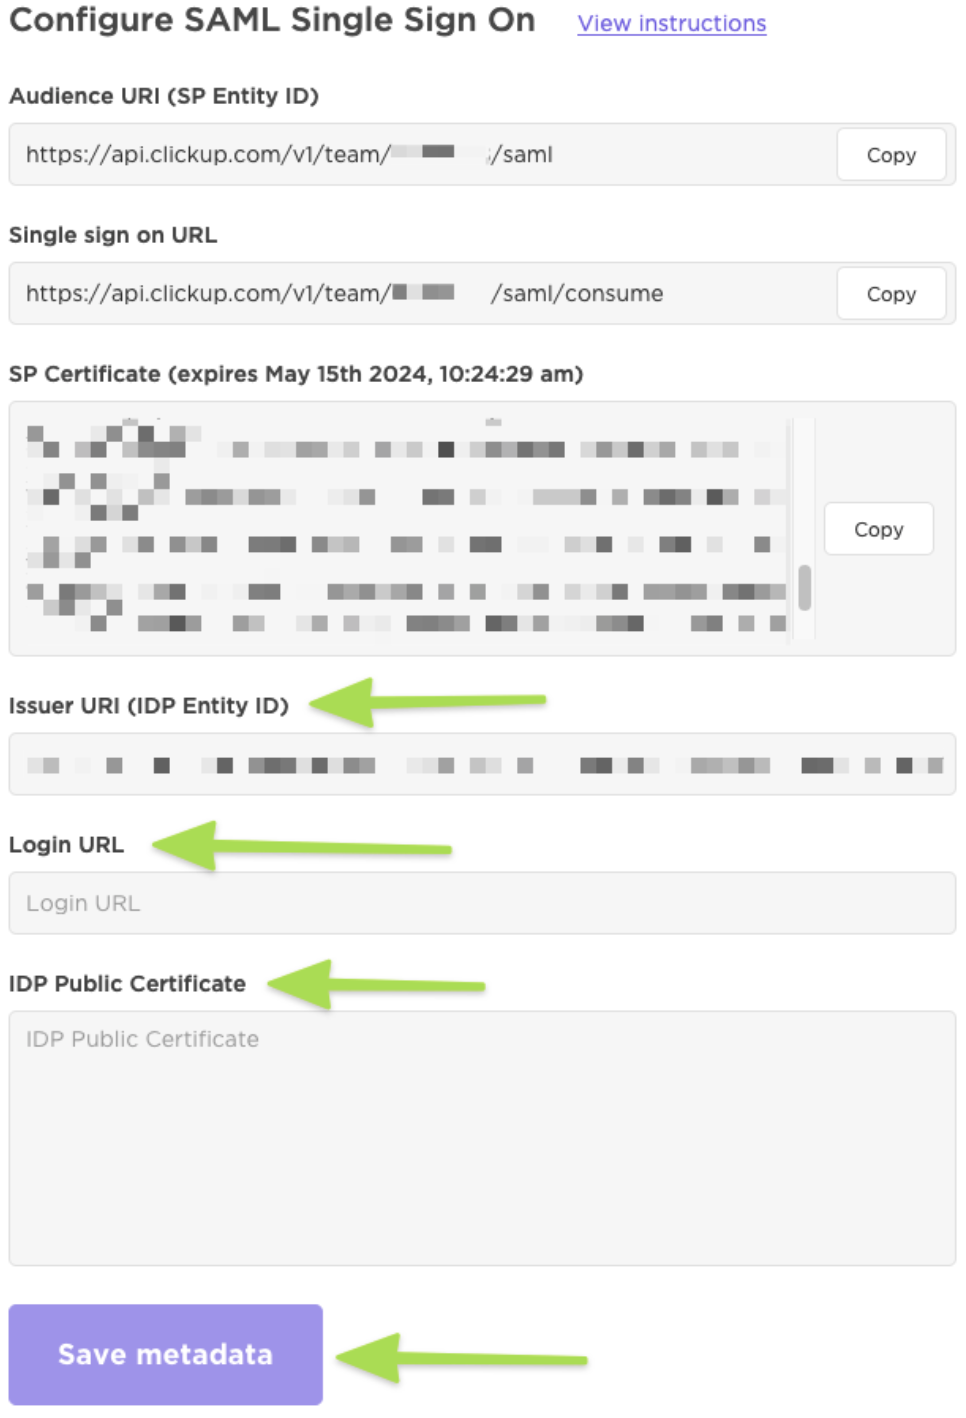 Screenshot showing the SAML configuration screen where users input their Issuer URI (IDP Entitity ID), Login URL (Single Sign On Service URL), and IDP Public Certificate.